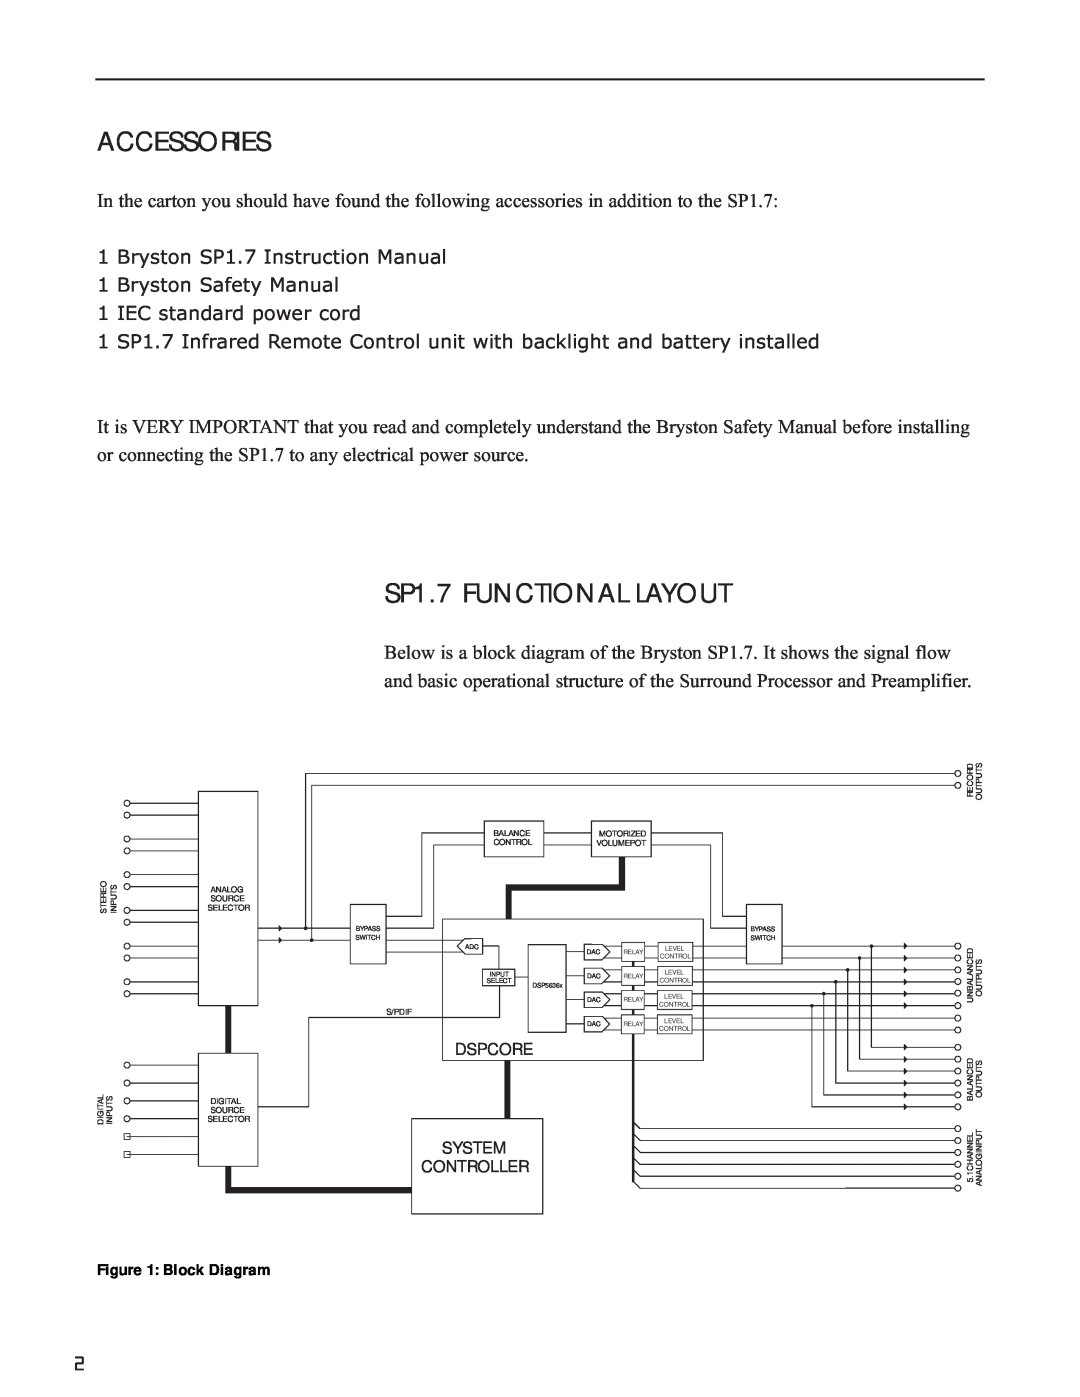 Bryston manual Accessories, SP1.7 FUNCTIONAL LAYOUT, Bryston Safety Manual 1 IEC standard power cord 